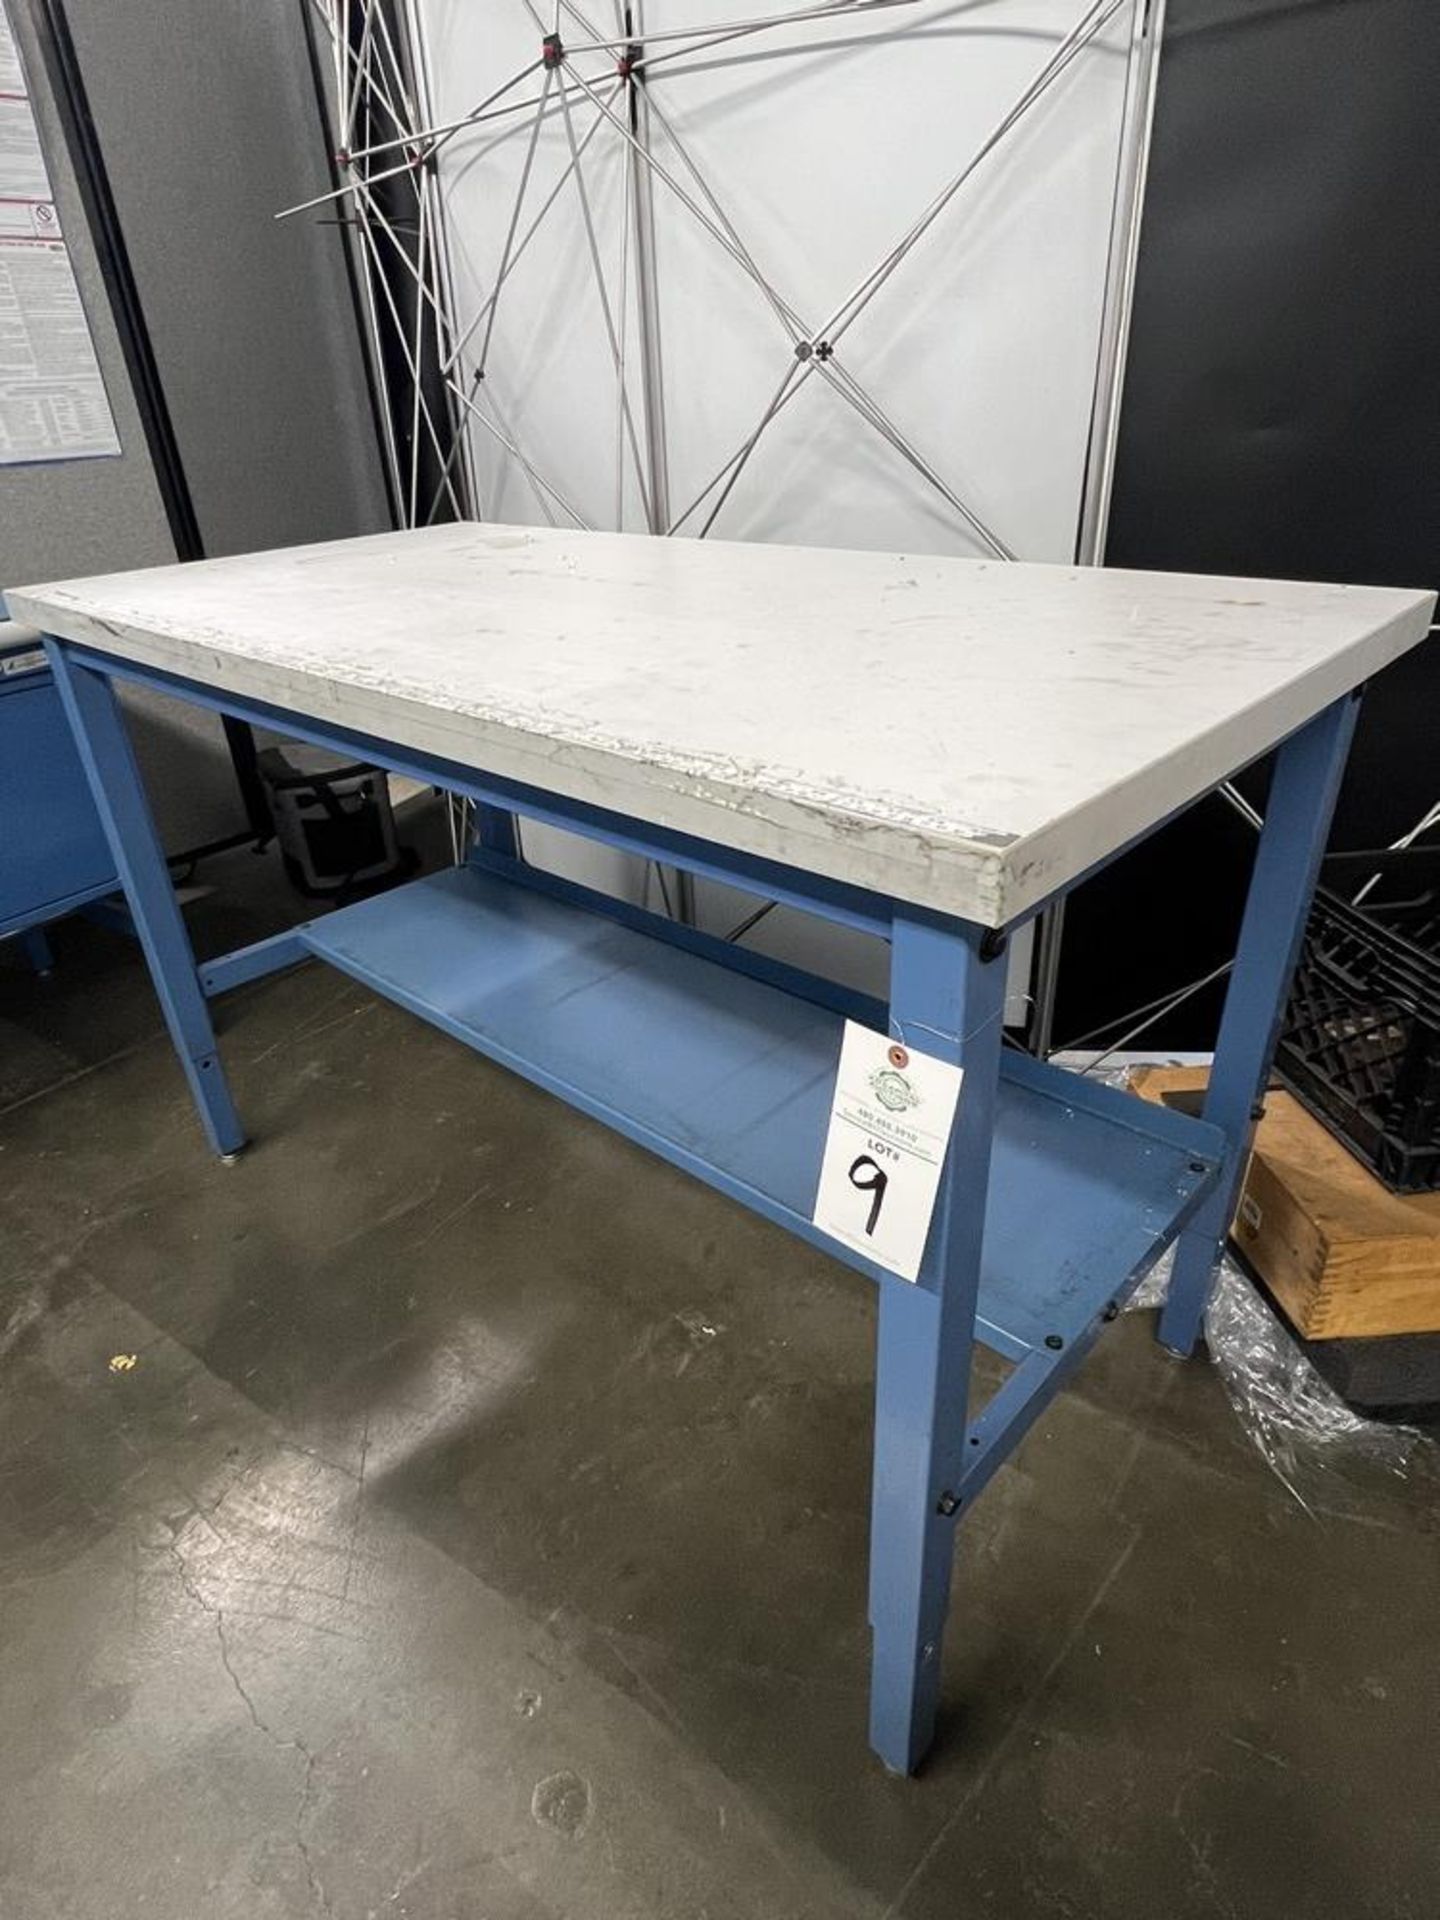 Global Industrial Work Table 5' x 30" x 38" - Image 2 of 3